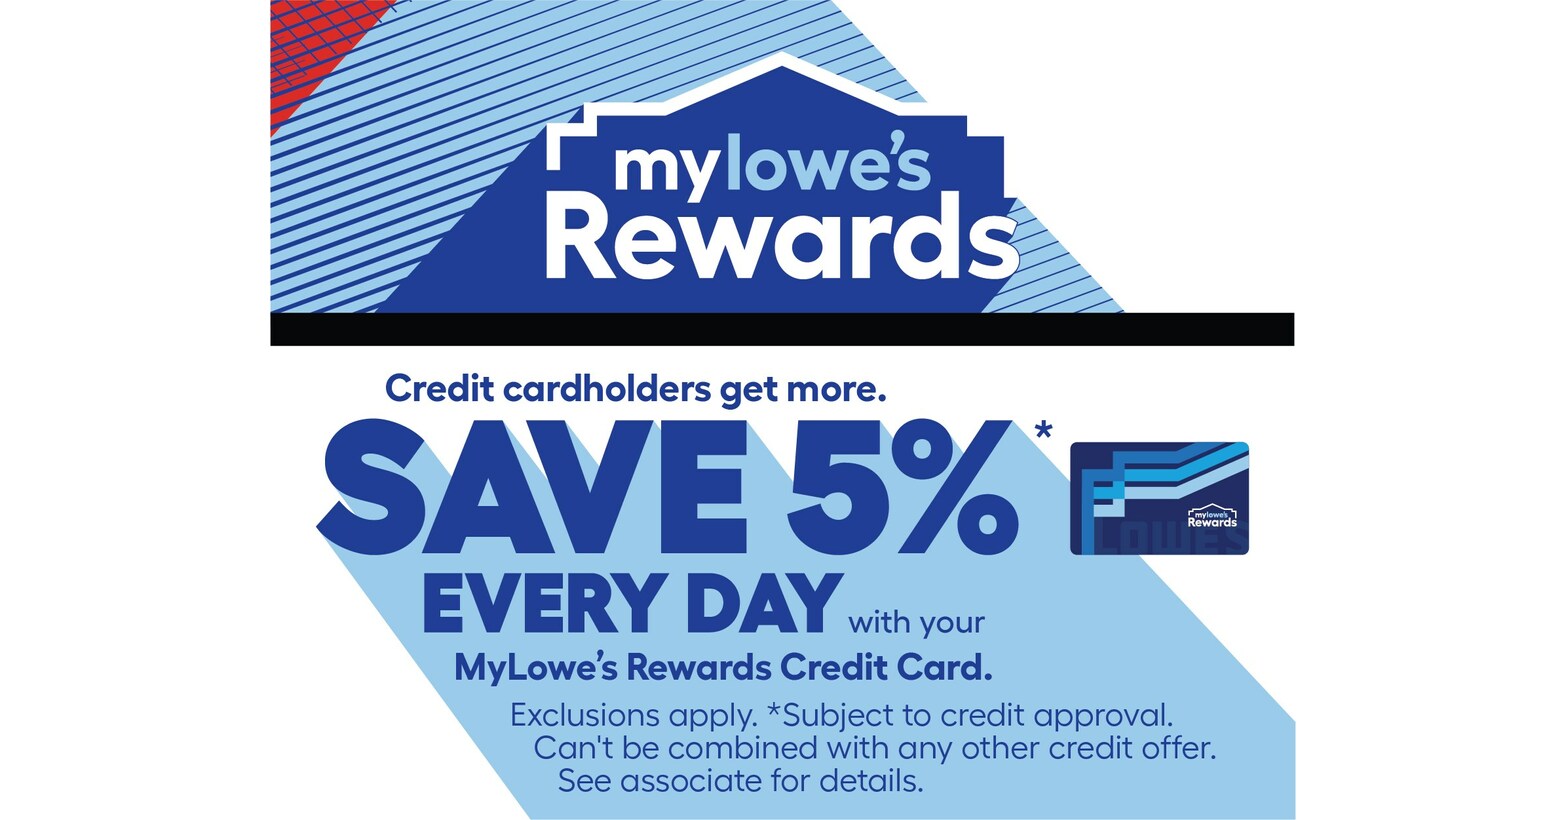 Lowe’s Launches MyLowe’s Rewards Loyalty Program Aimed at Helping DIYers Get More Value When They Choose Lowe’s for Their Home Improvement Needs